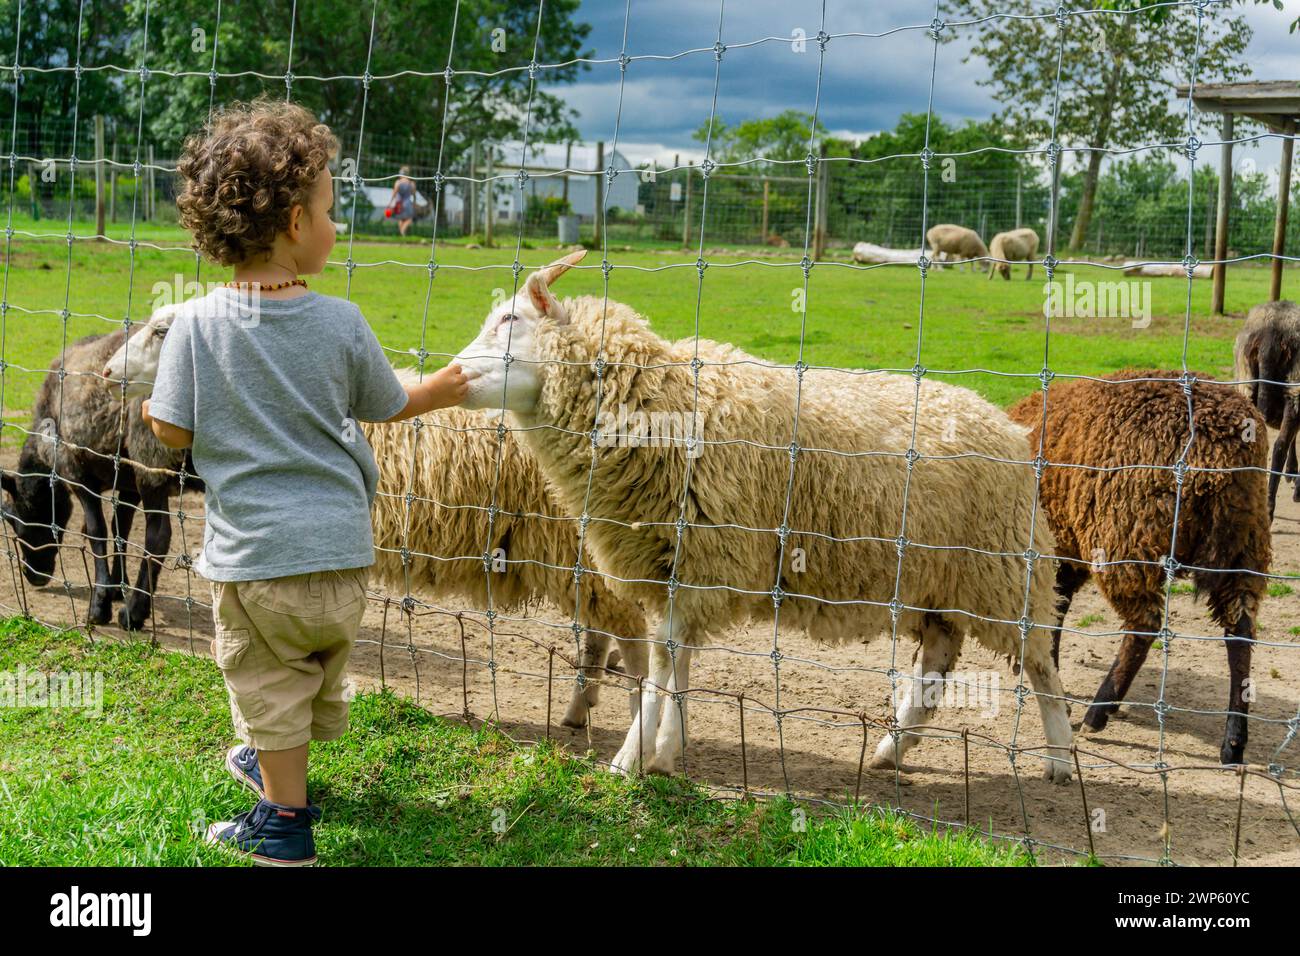 Oshawa zoo, Canada, AUG2017 - Male child offering food to sheep through a barbed fence showcasing a heartwarming interaction between human and animal. Stock Photo